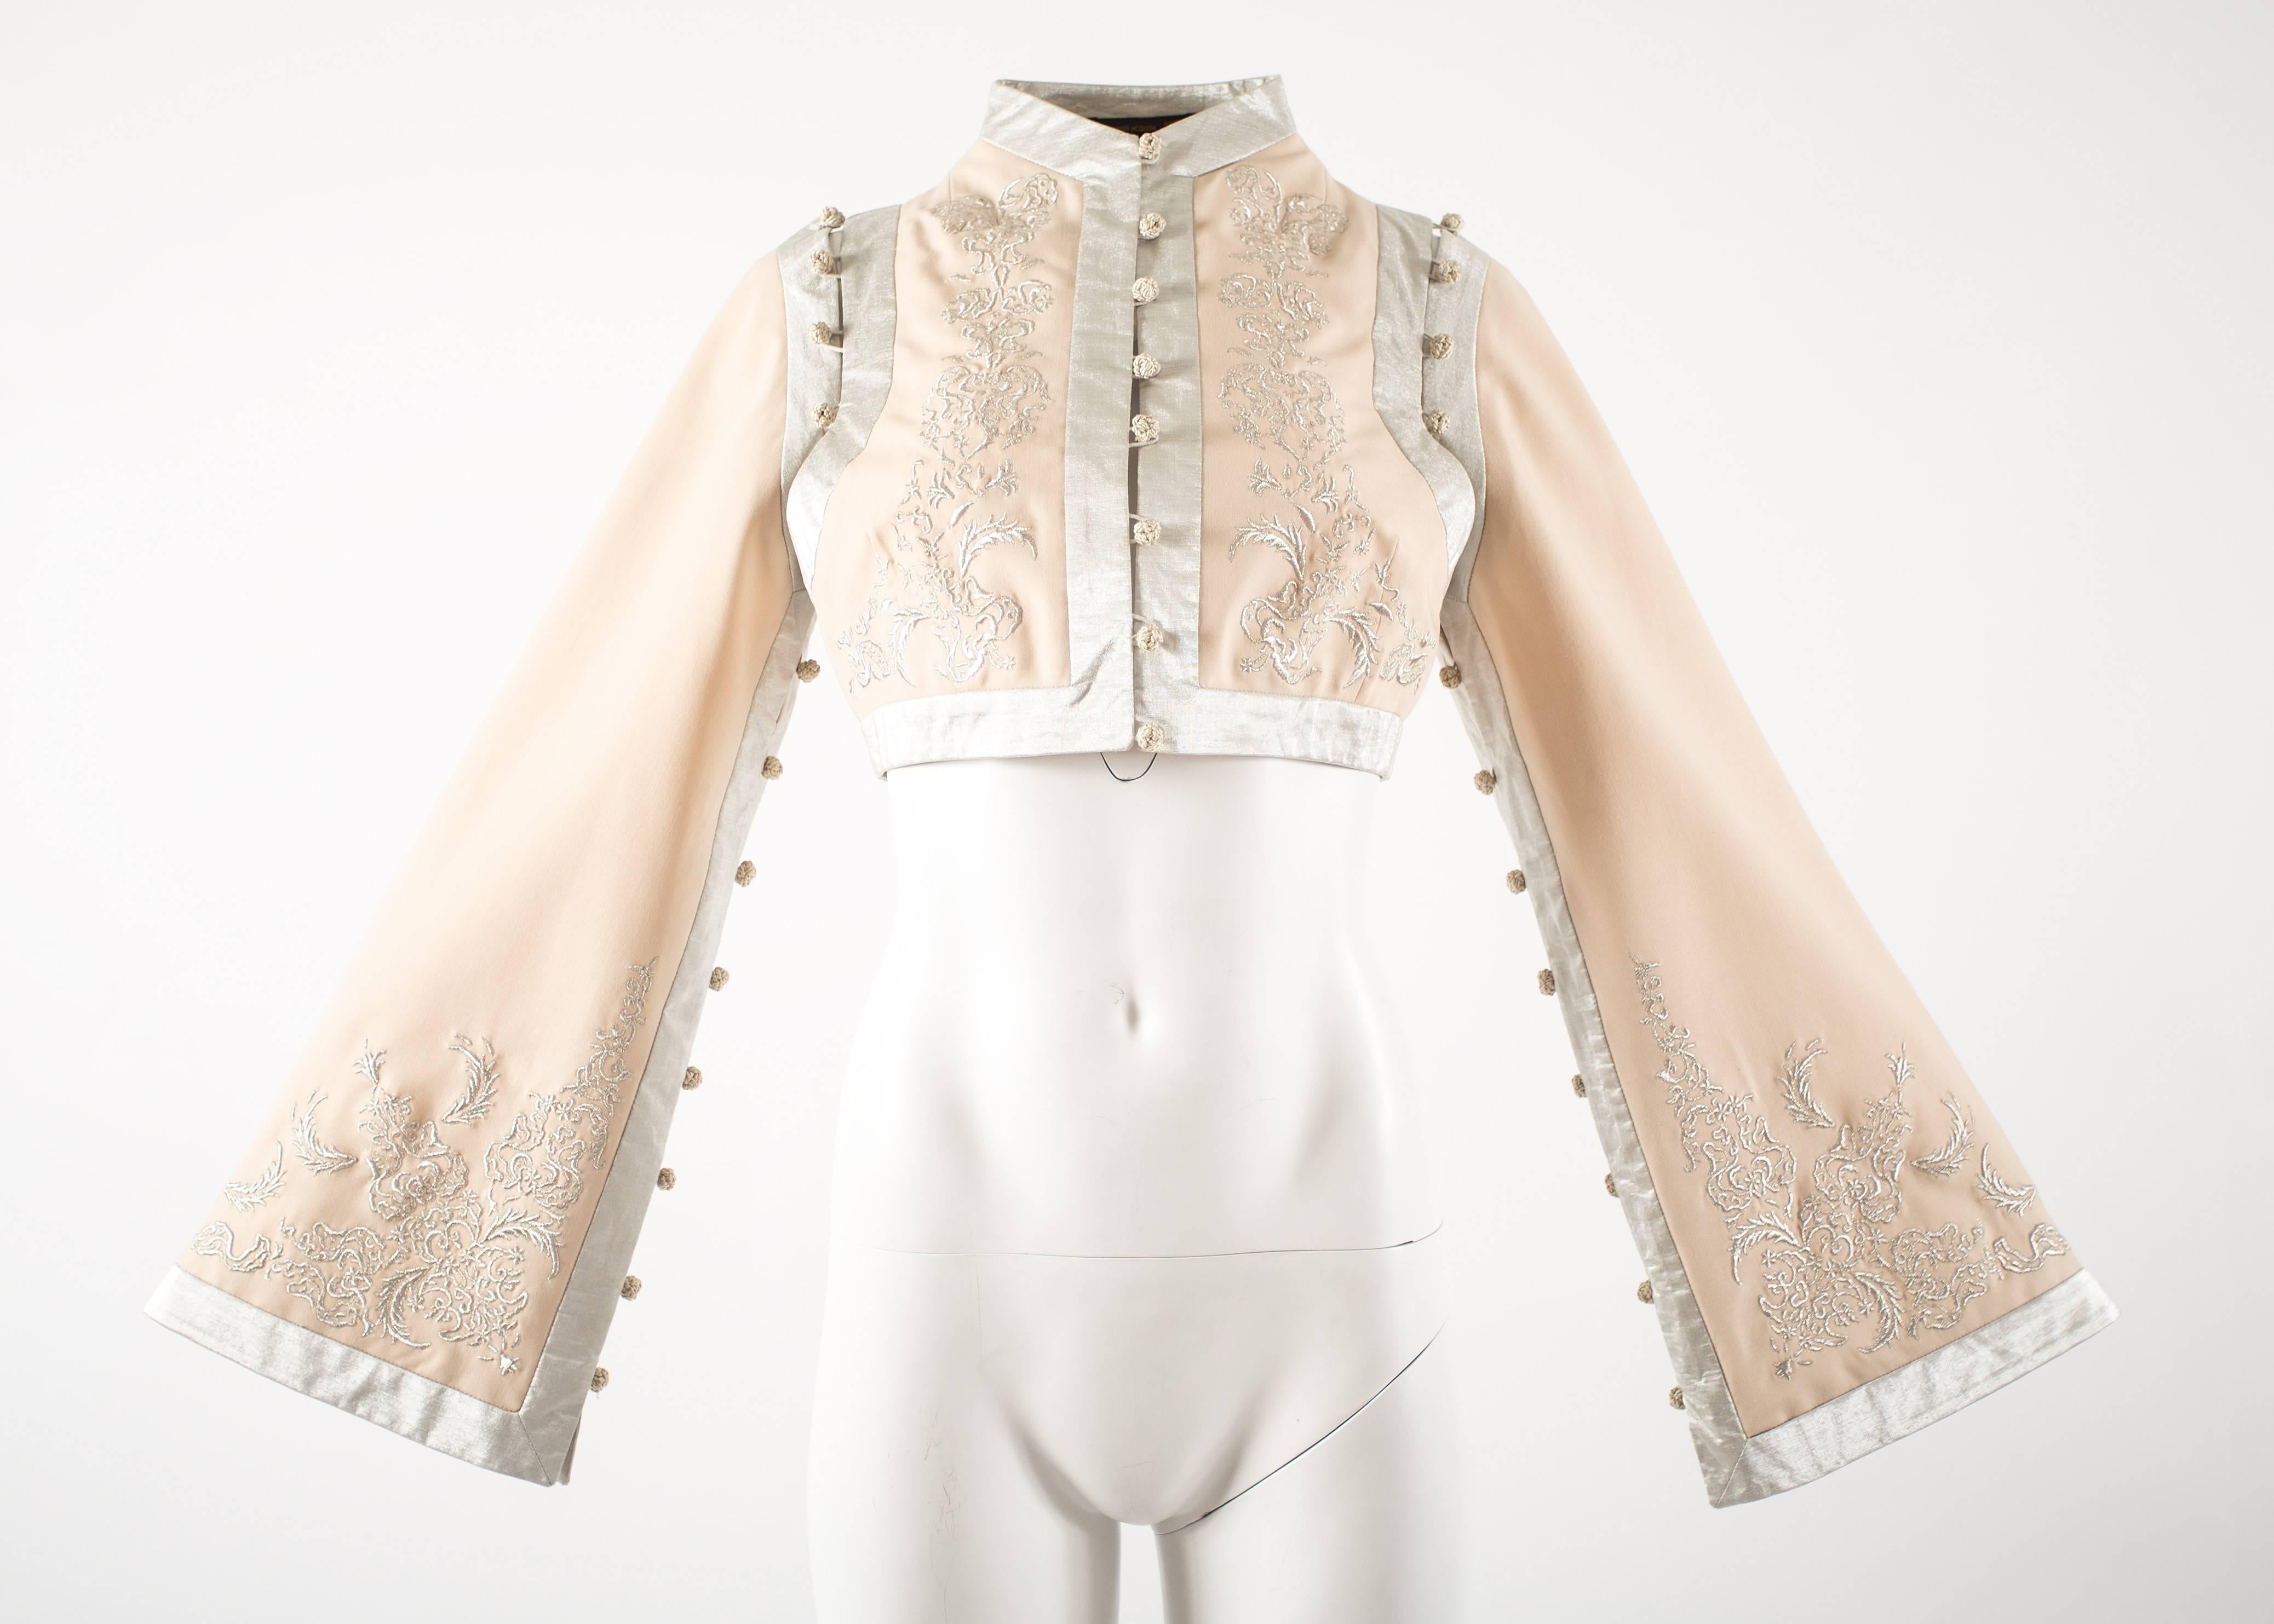 Introducing the archival Alexander McQueen Spring-Summer 2000 ivory silk cropped jacket, a stunning and timeless piece from the late designer's iconic collection.

This exquisite jacket features metallic embroidery, adding a touch of opulence and